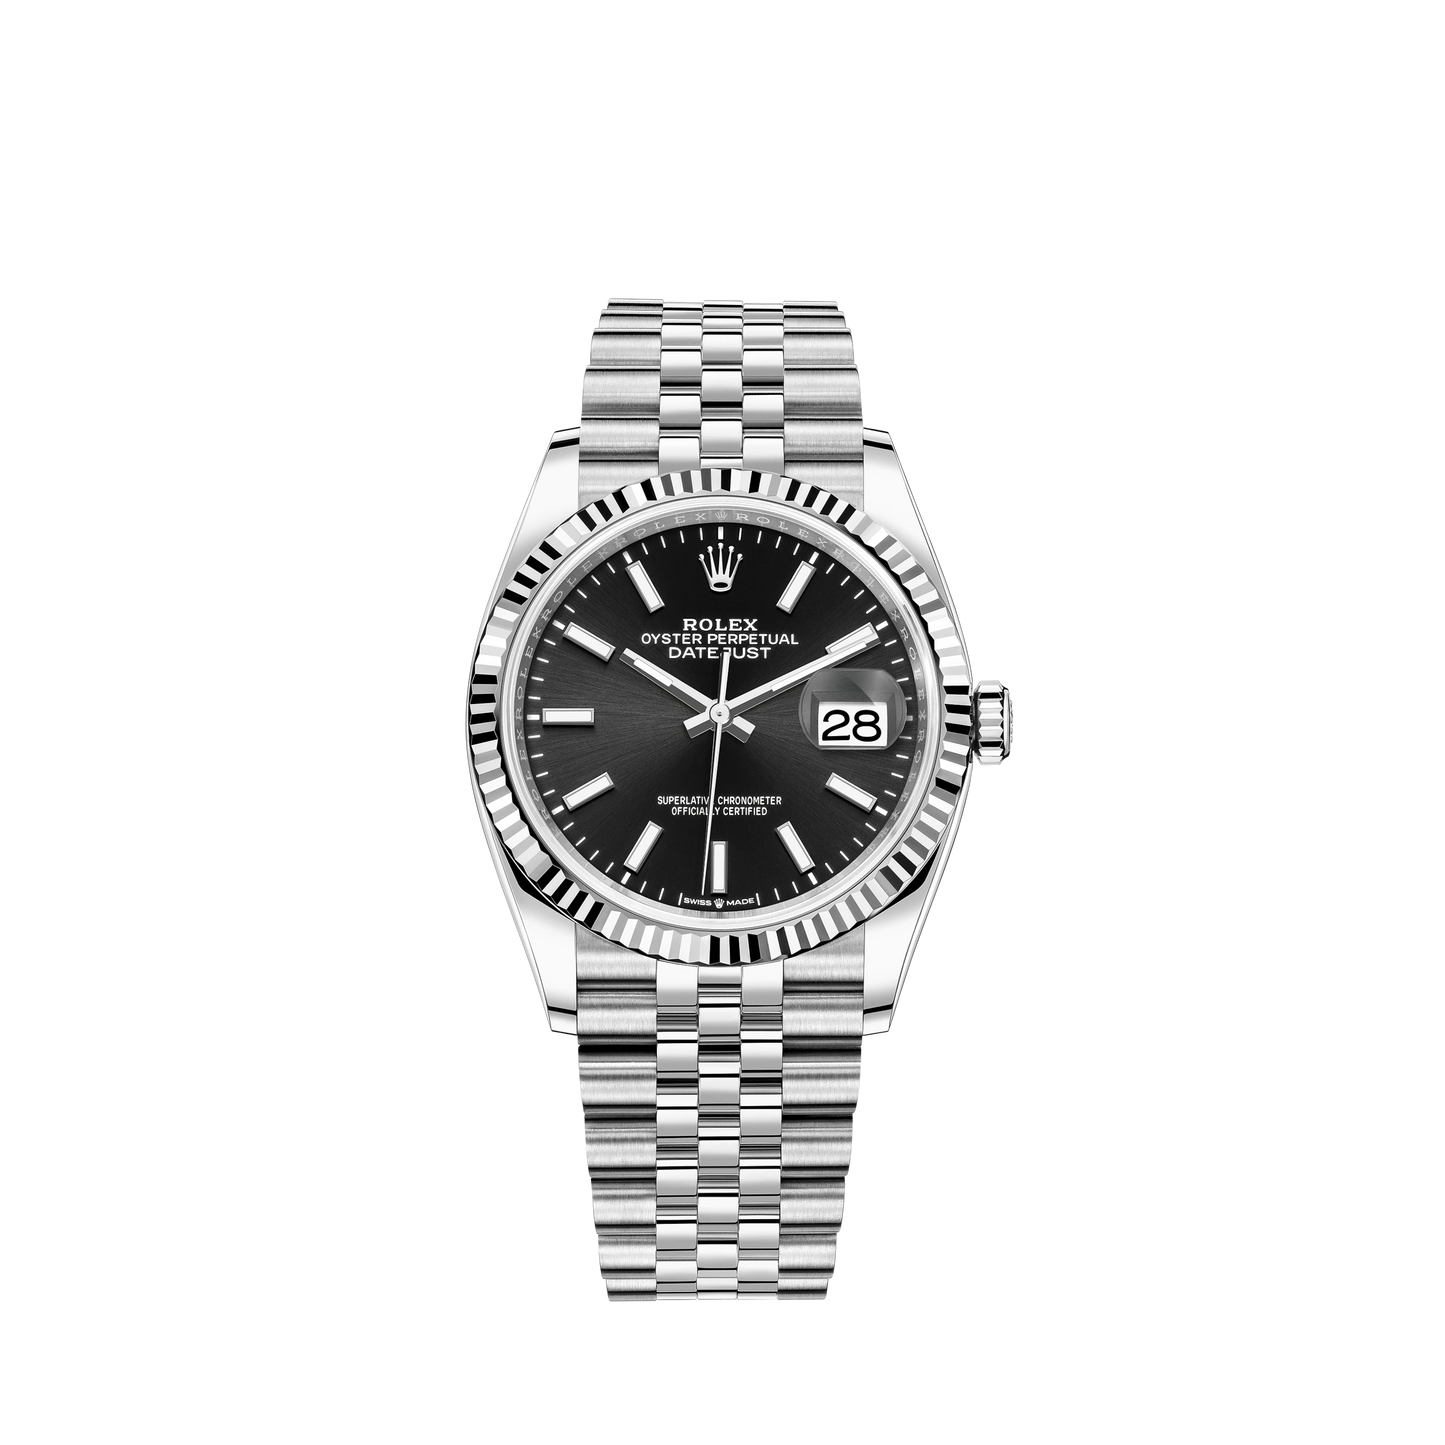 Datejust 36 36mm Oystersteel Jubilee Bracelet and White Gold with Bright Black Dial Fluted Bezel